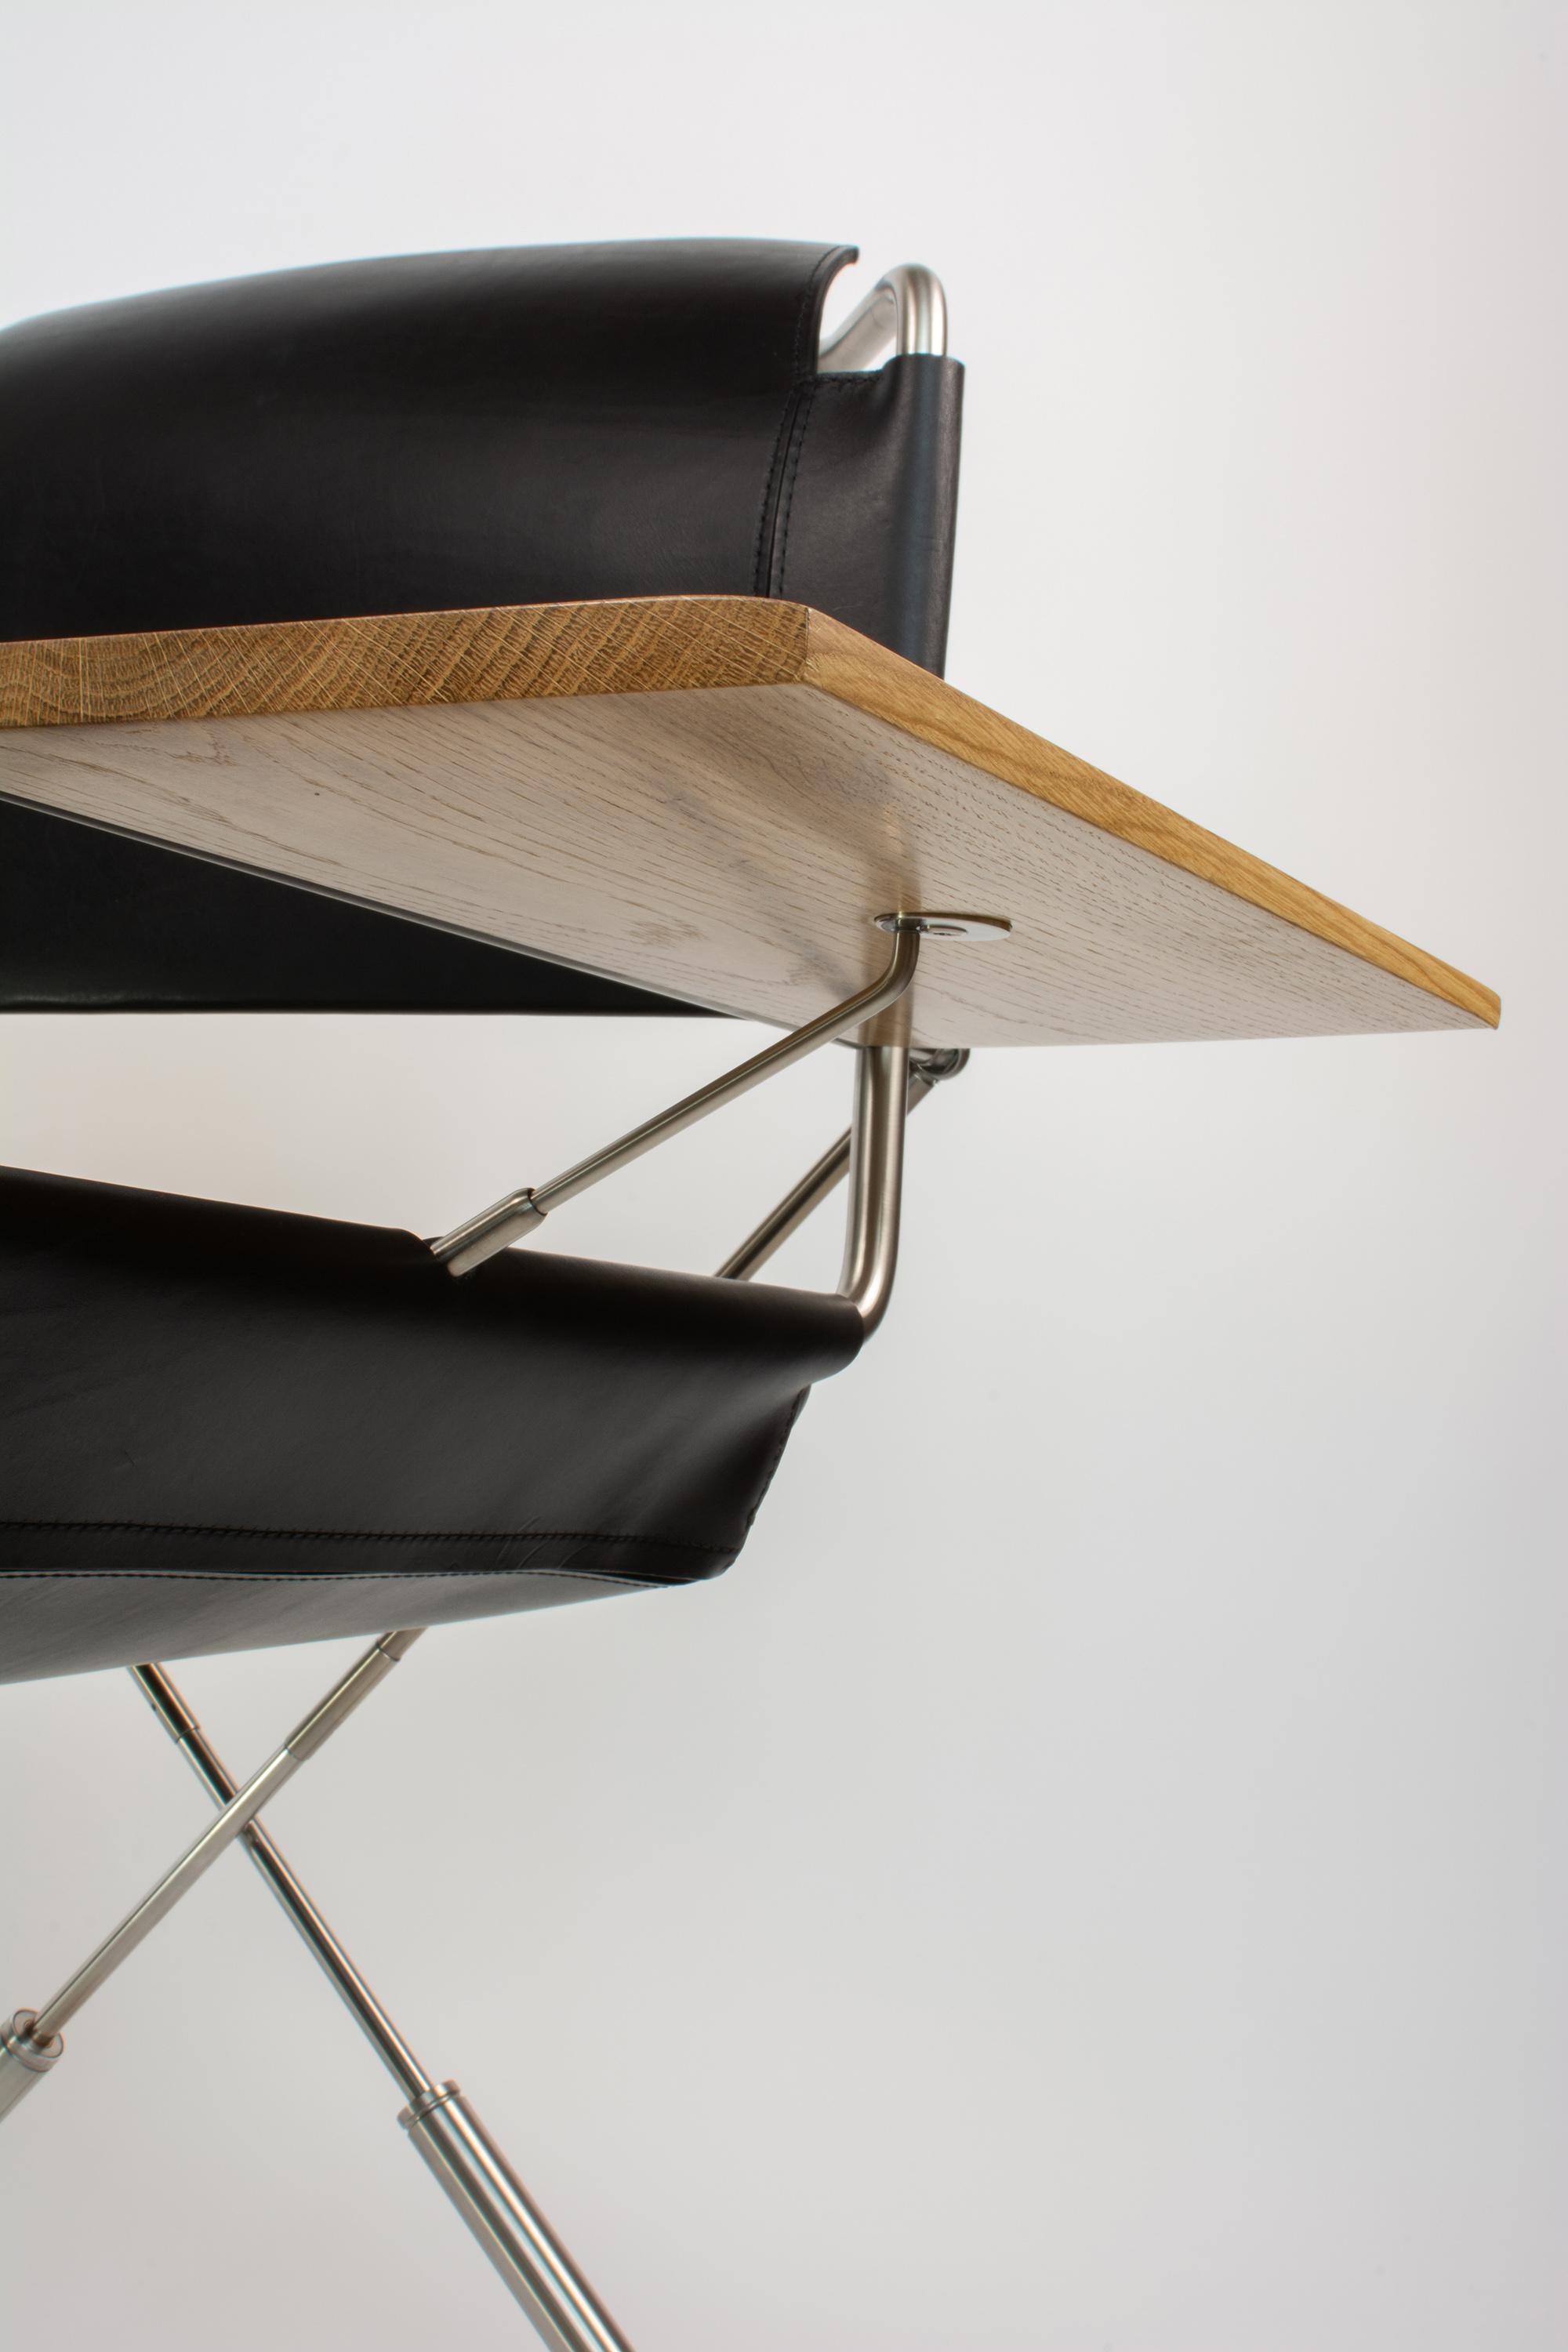 Bauhaus inspired Pneumatic Chair - handcrafted with the finest tuscan leather 1